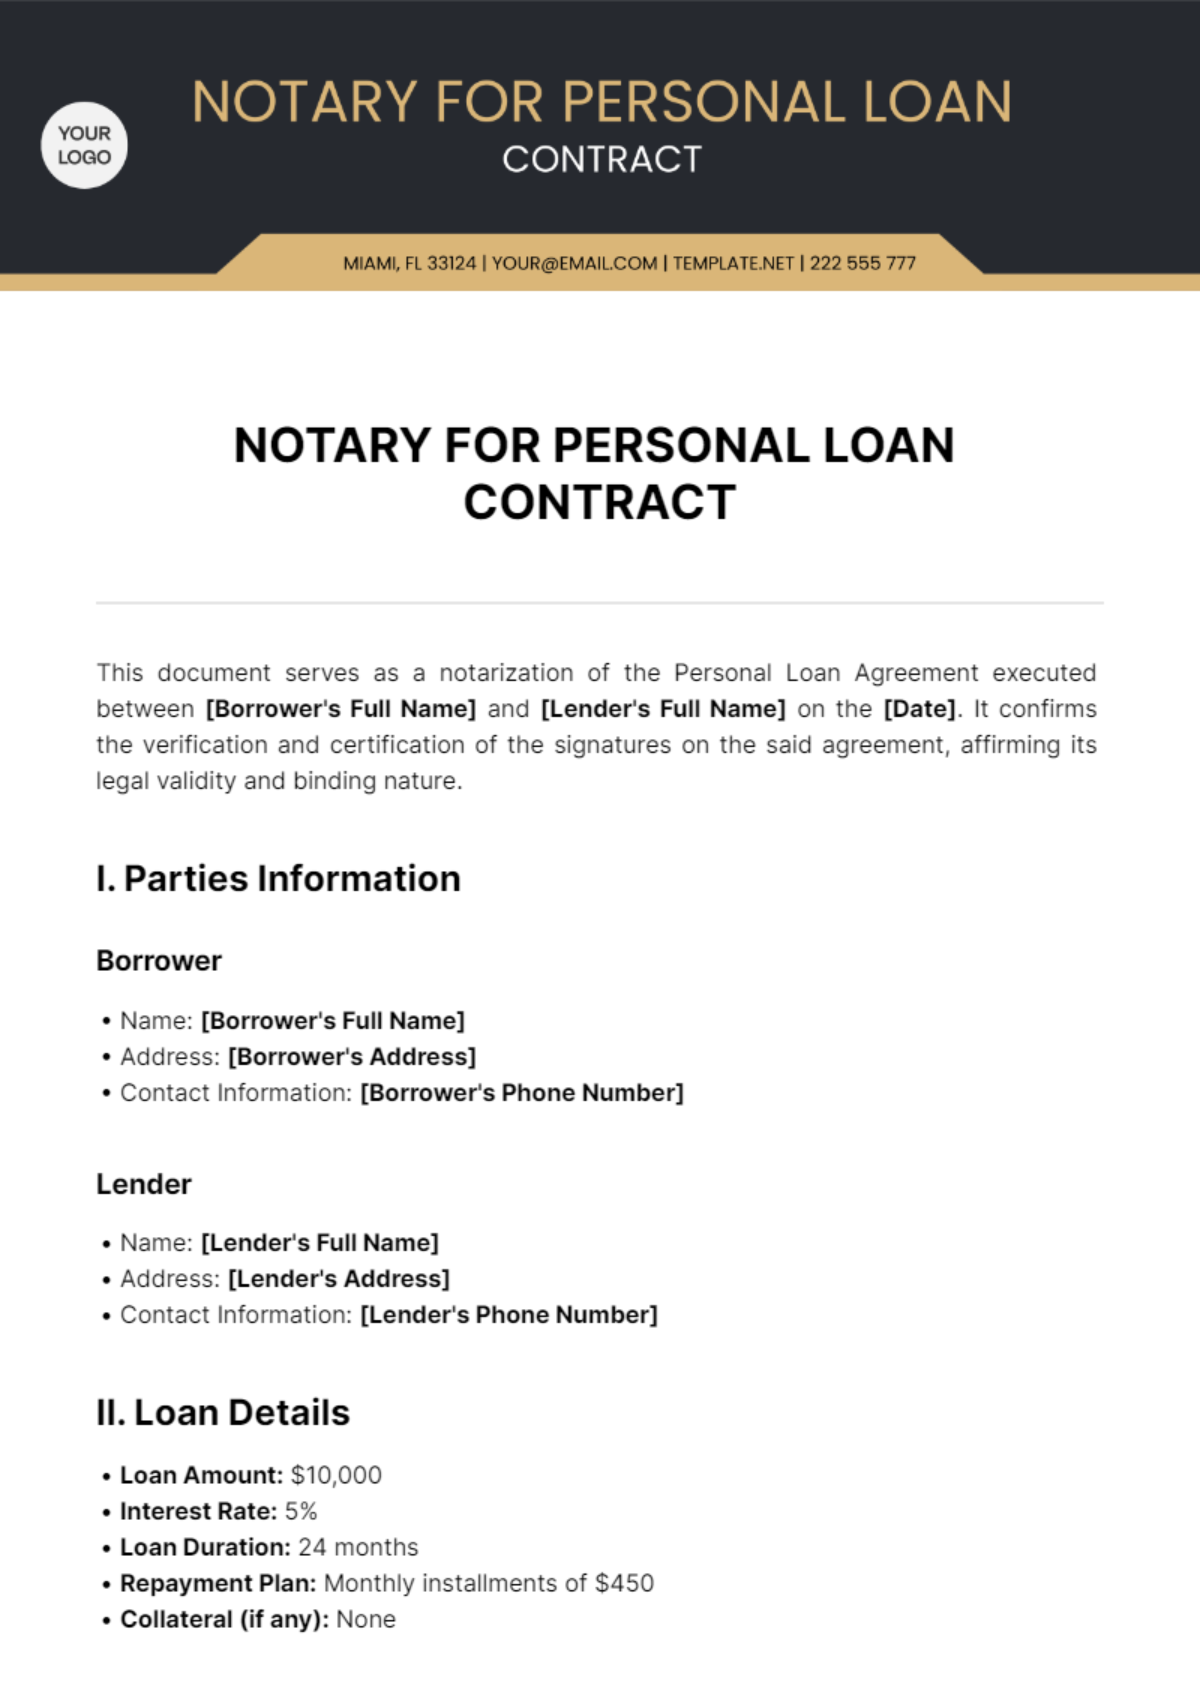 Notary for Personal Loan Contract Template